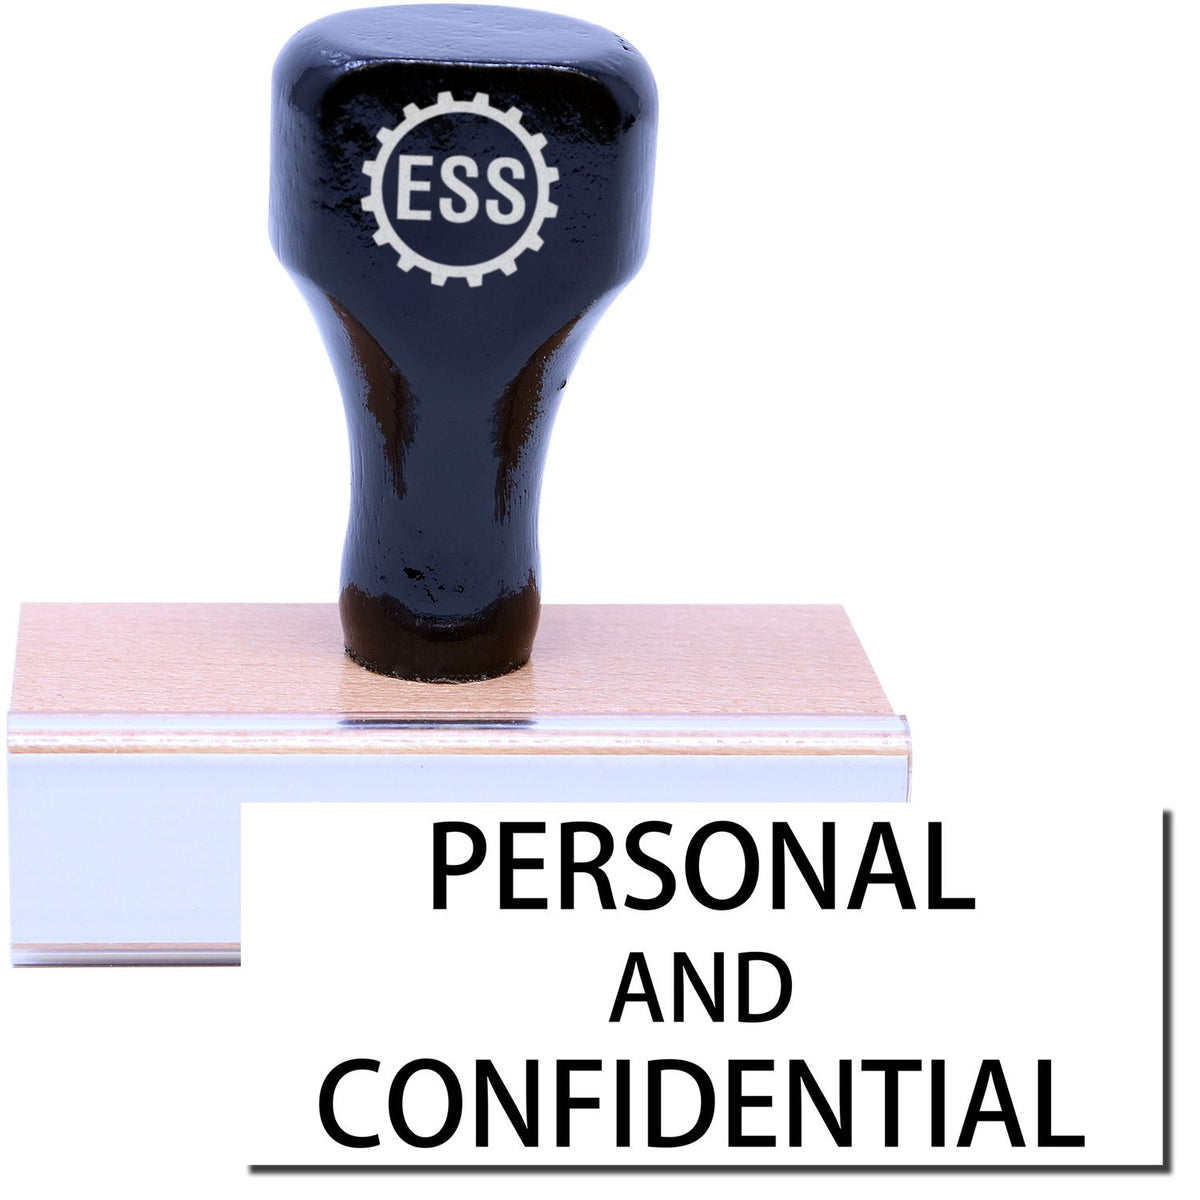 A stock office rubber stamp with a stamped image showing how the text &quot;PERSONAL AND CONFIDENTIAL&quot; in a large font is displayed after stamping.